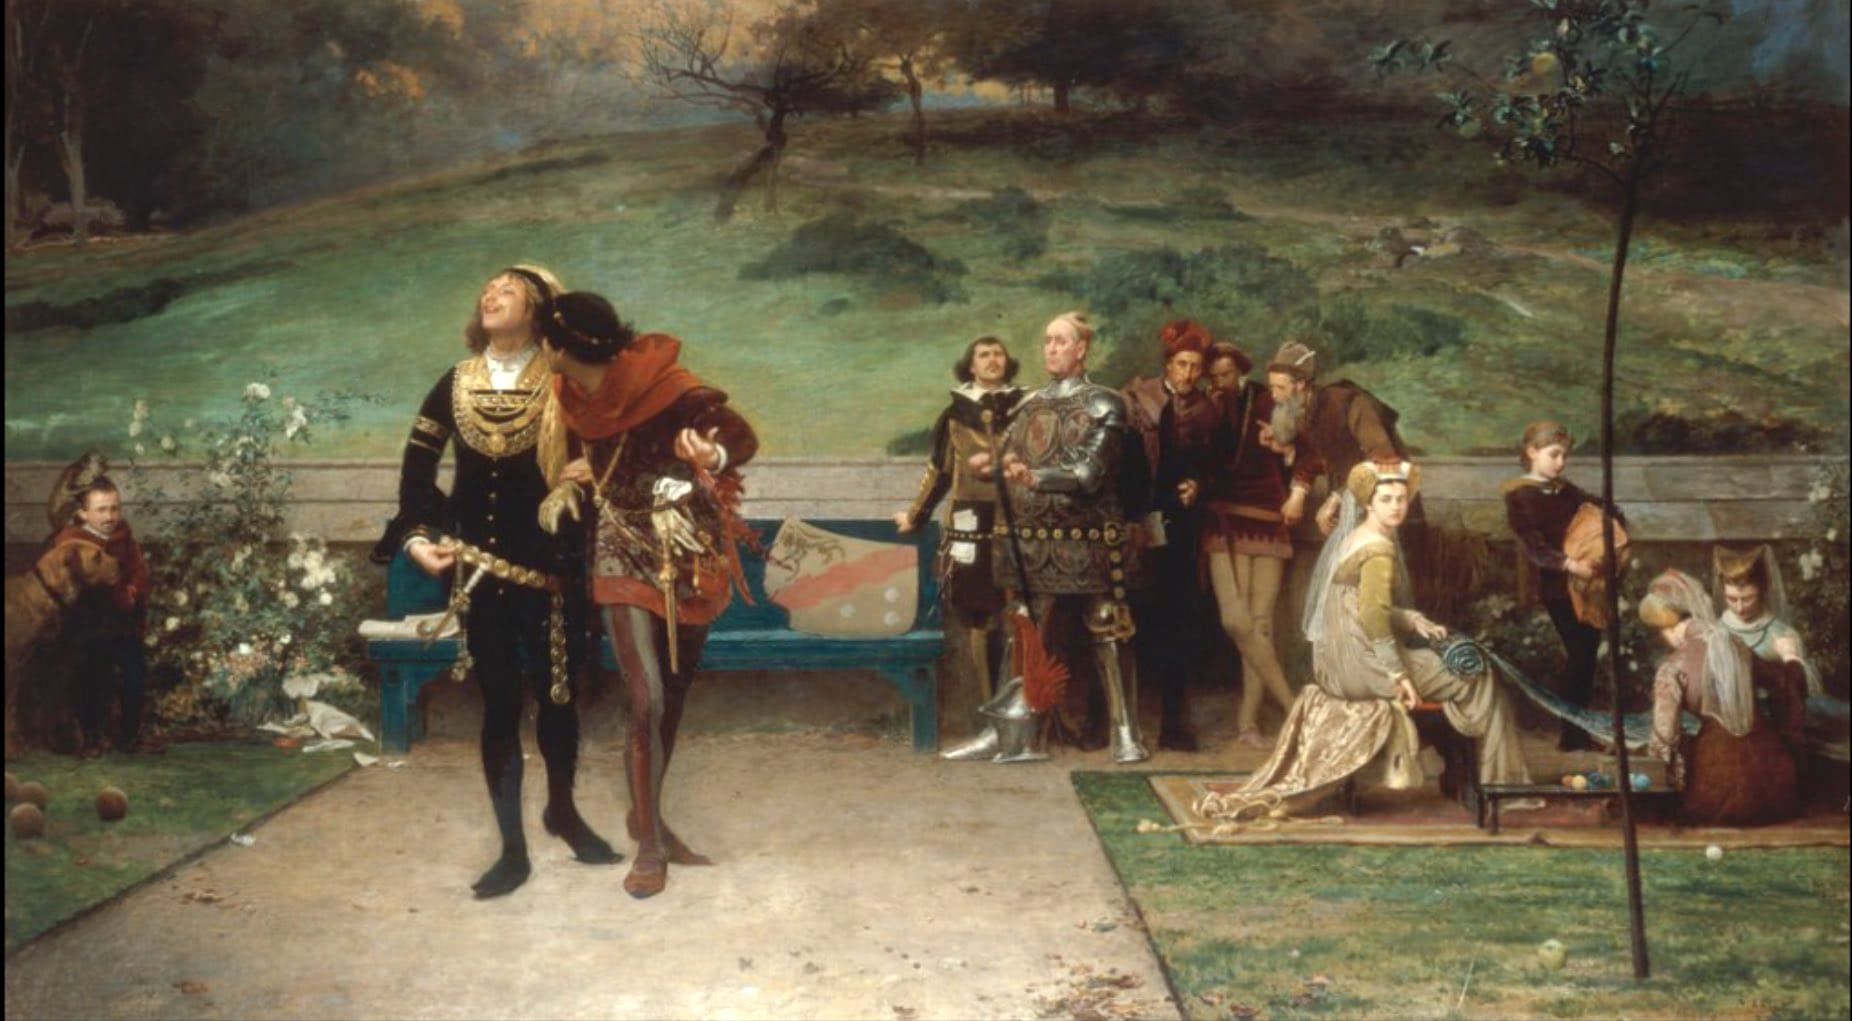 Two men flirting in front of a royal court